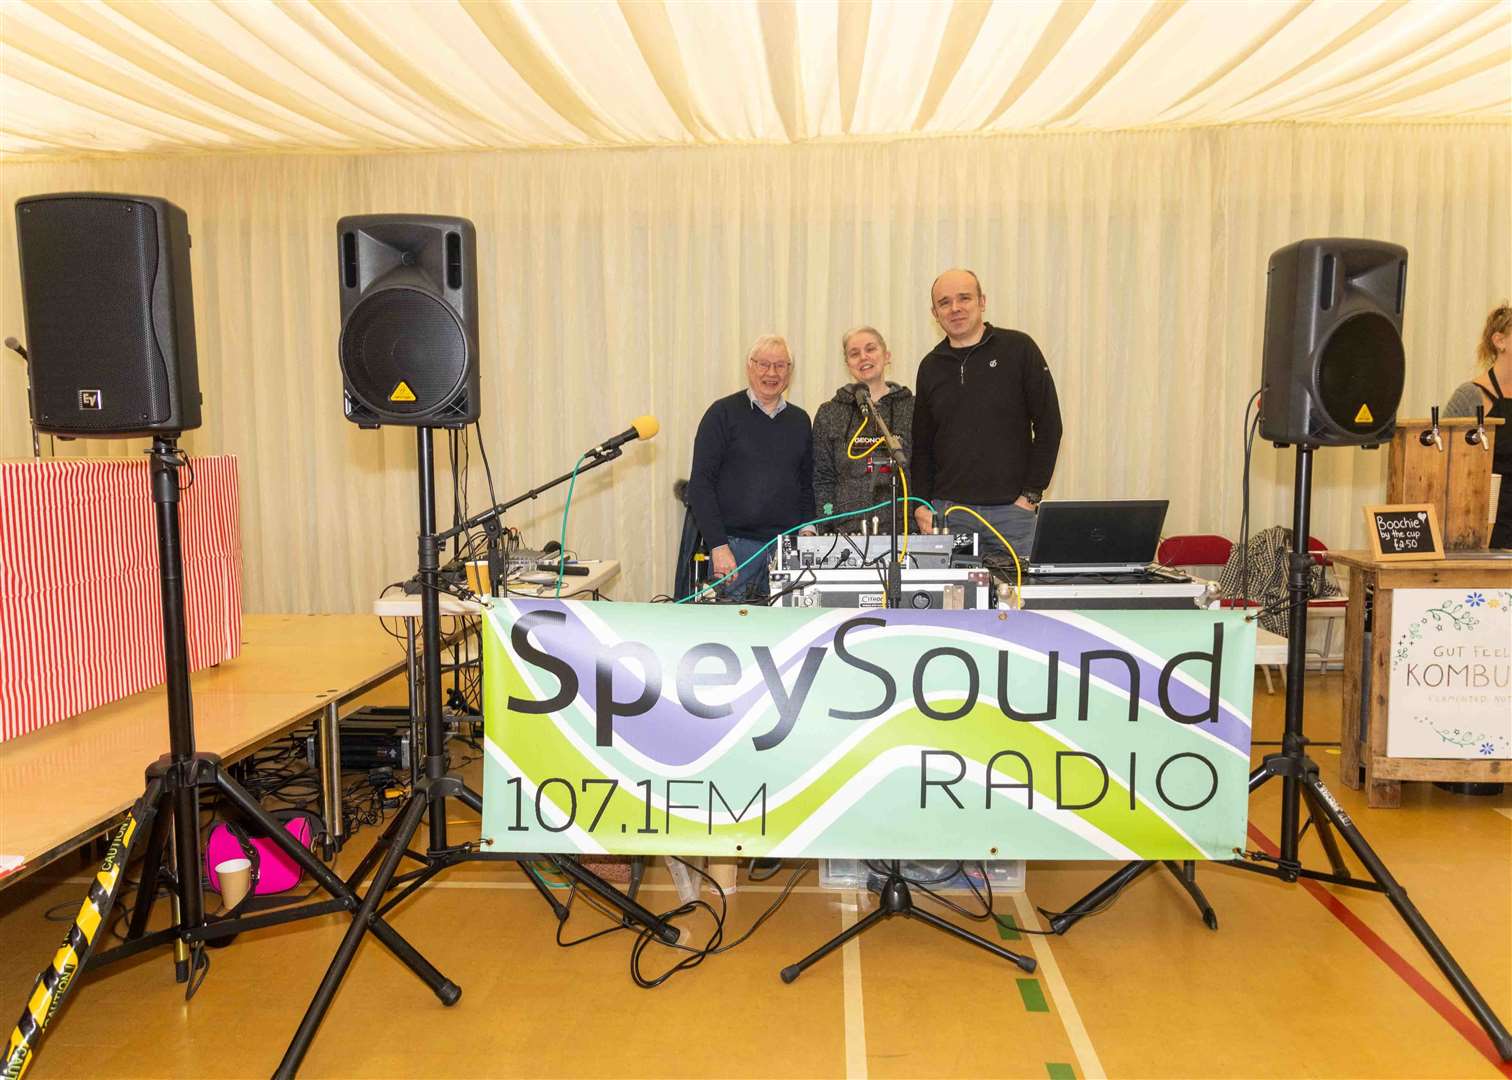 Going on air: Speysound broadcast live from the big show.